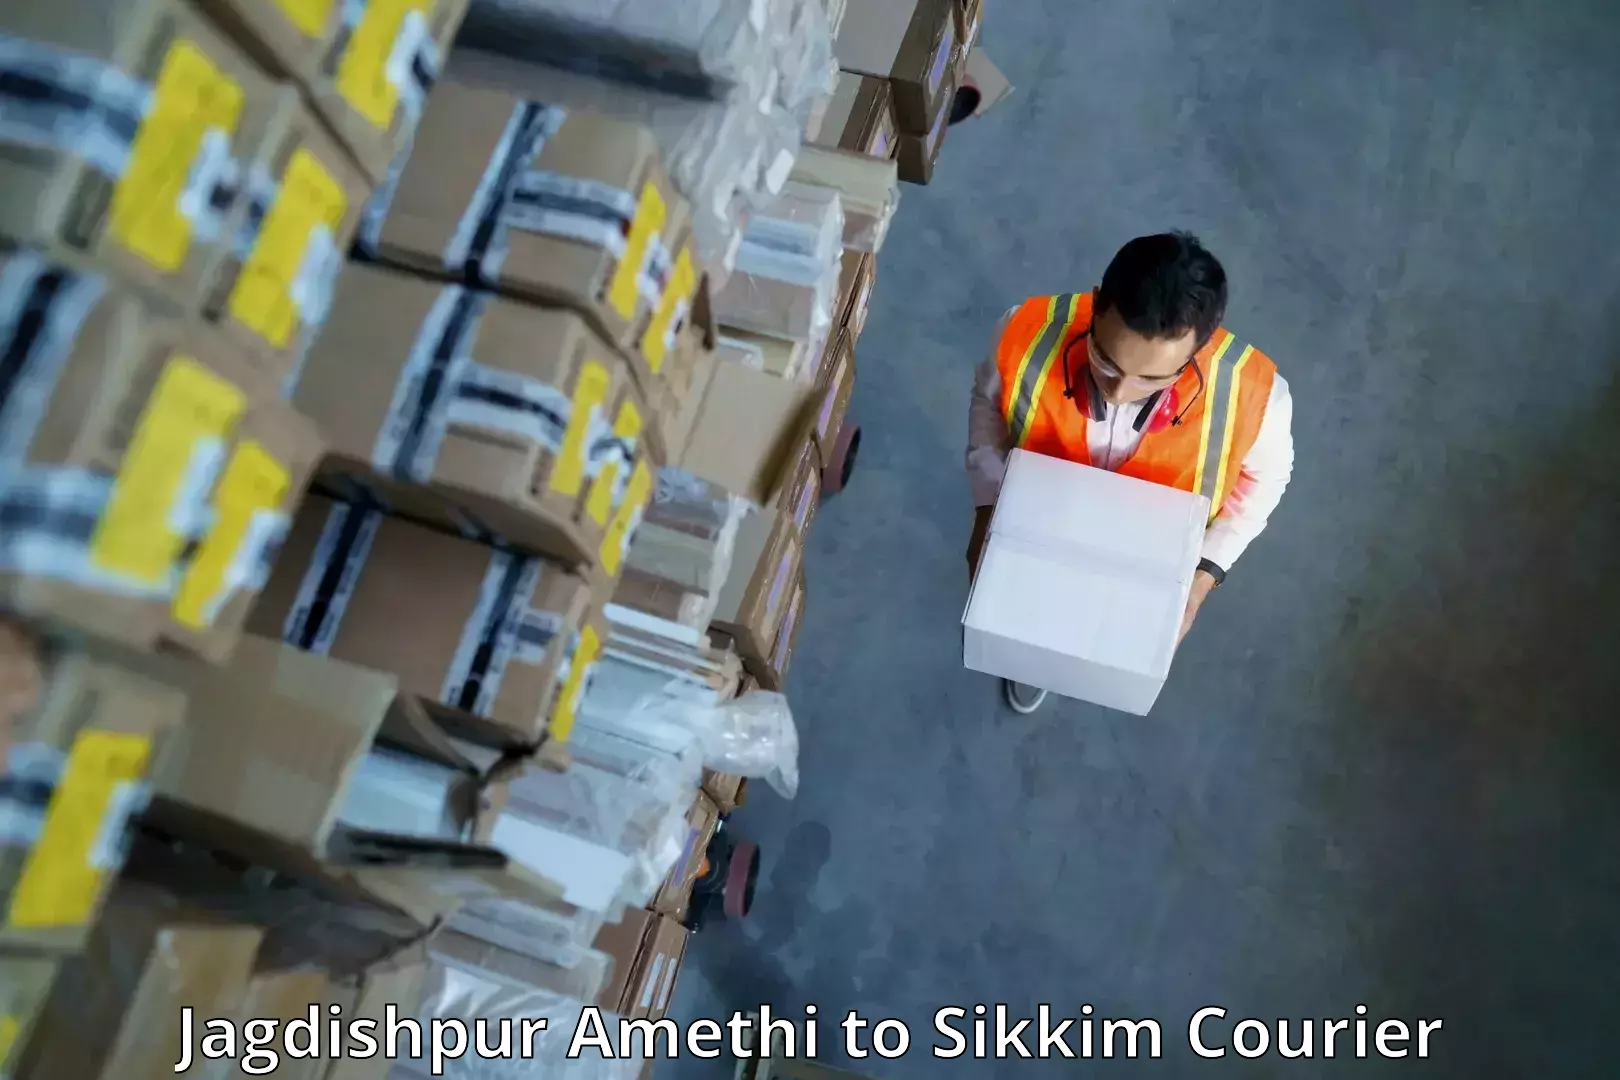 On-call courier service Jagdishpur Amethi to Jorethang